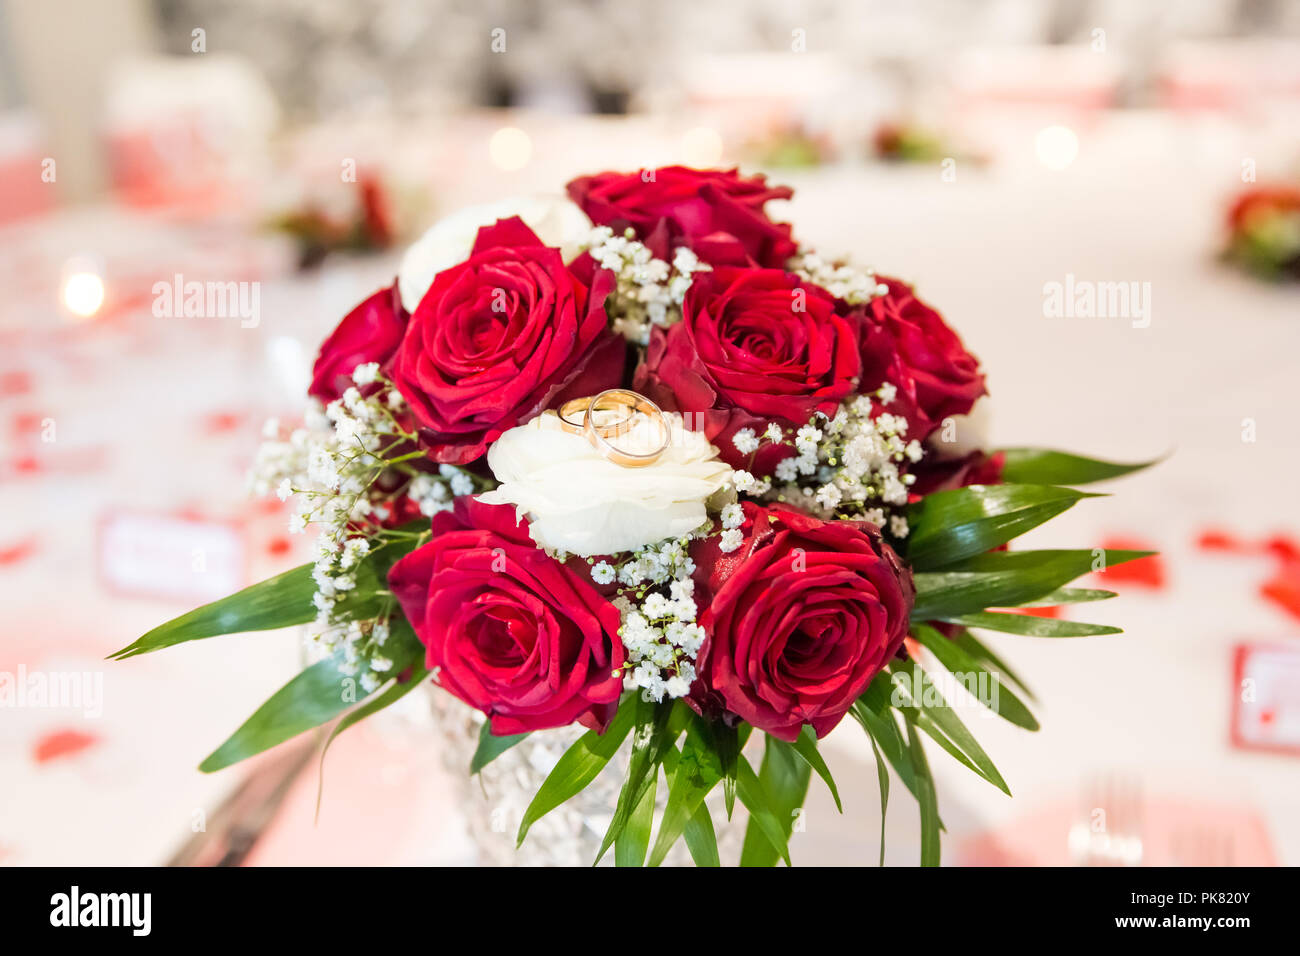 Wedding Rings on White and Red Roses Bridal Bouquet Stock Photo